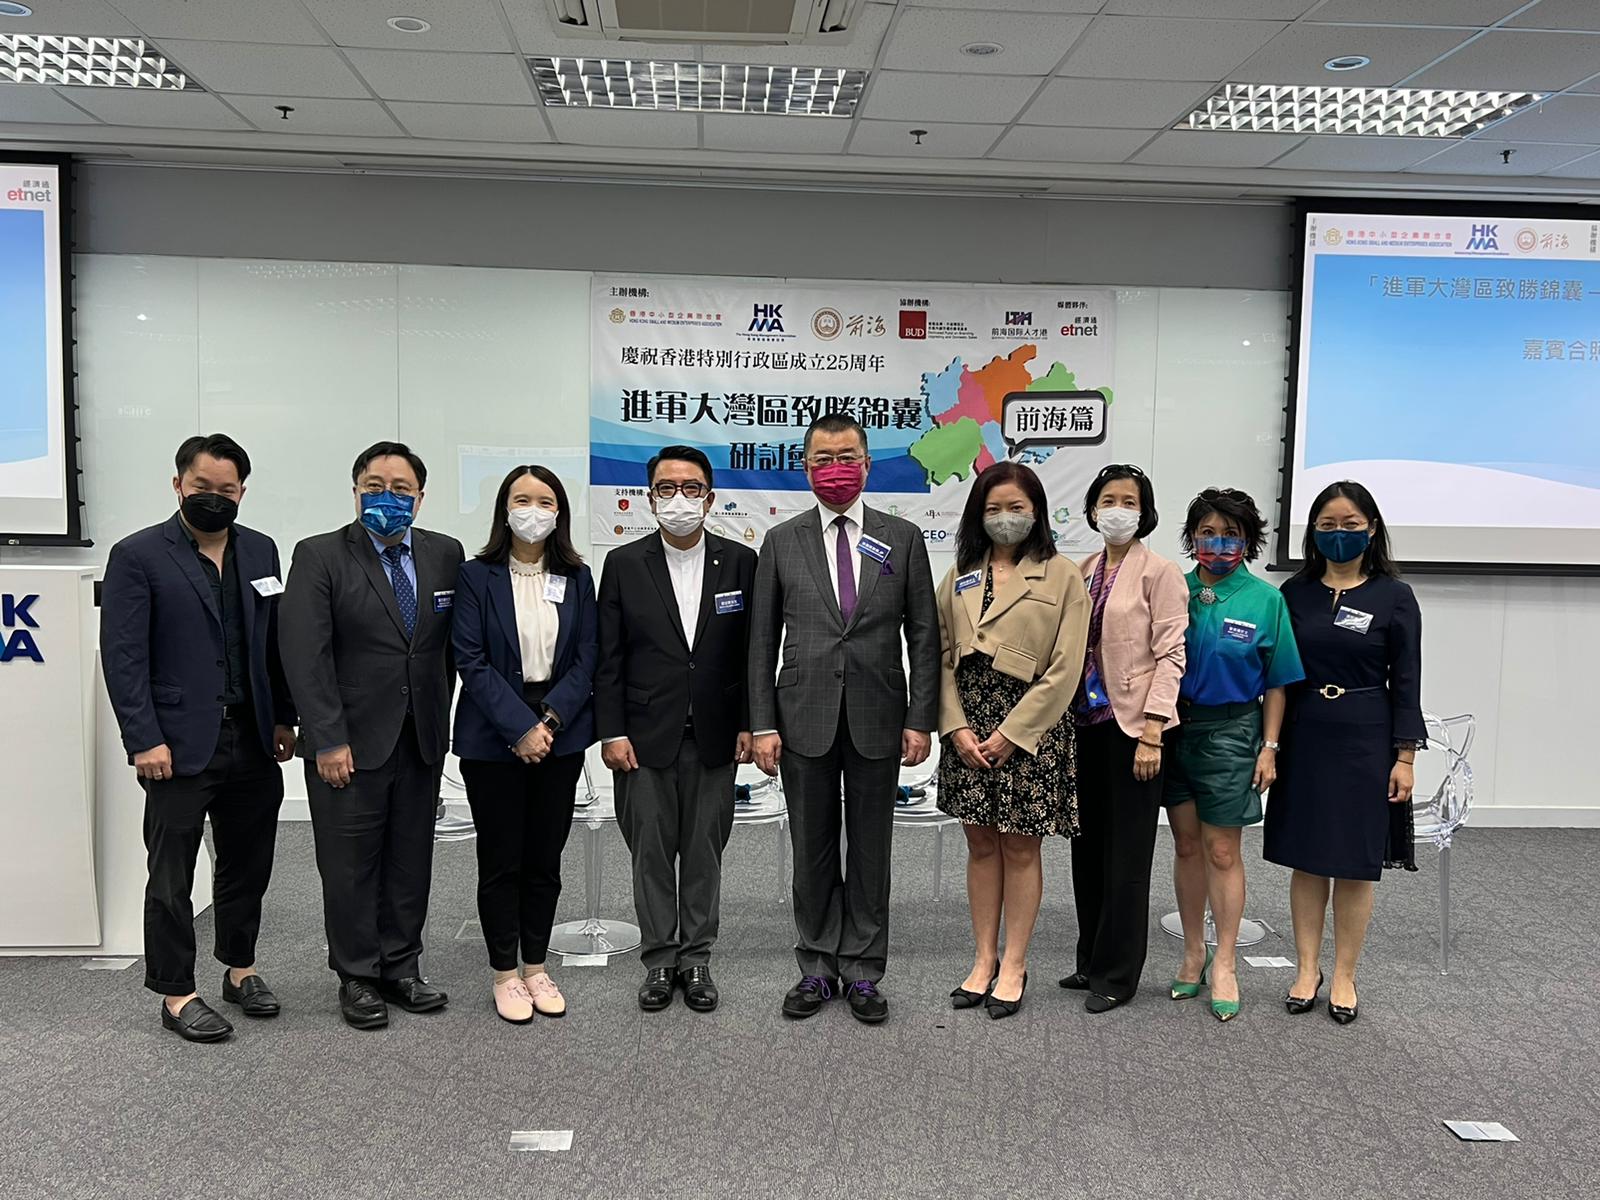 Group photo of representatives of joint organizers and guest speakers of the Seminar for Strategies of Entering GBA Market – Qianhai